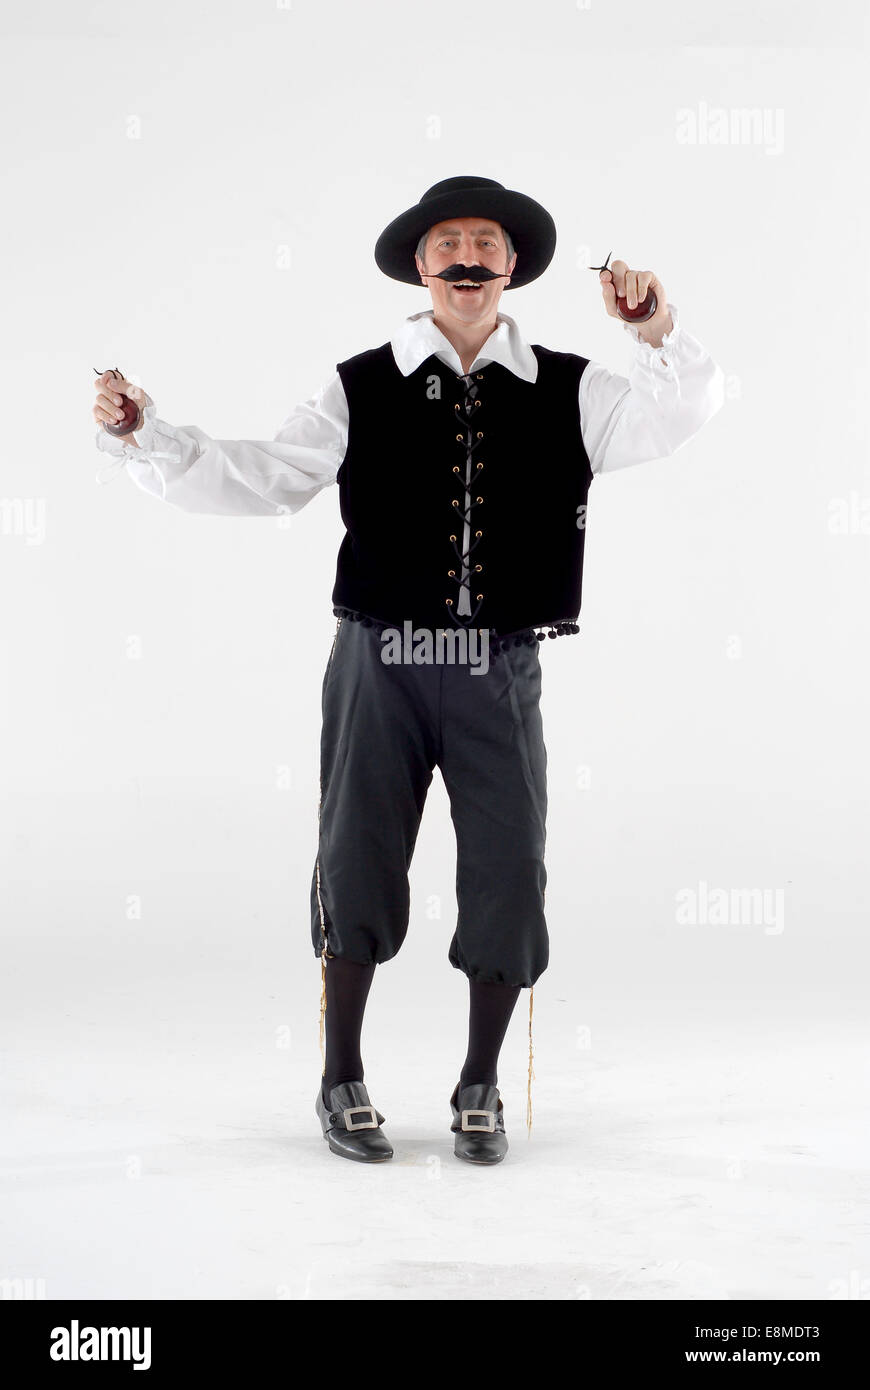 man in fancy dress comedy costume in a traditional spanish mandolin, music player / busker outfit, with castanet's, Stock Photo